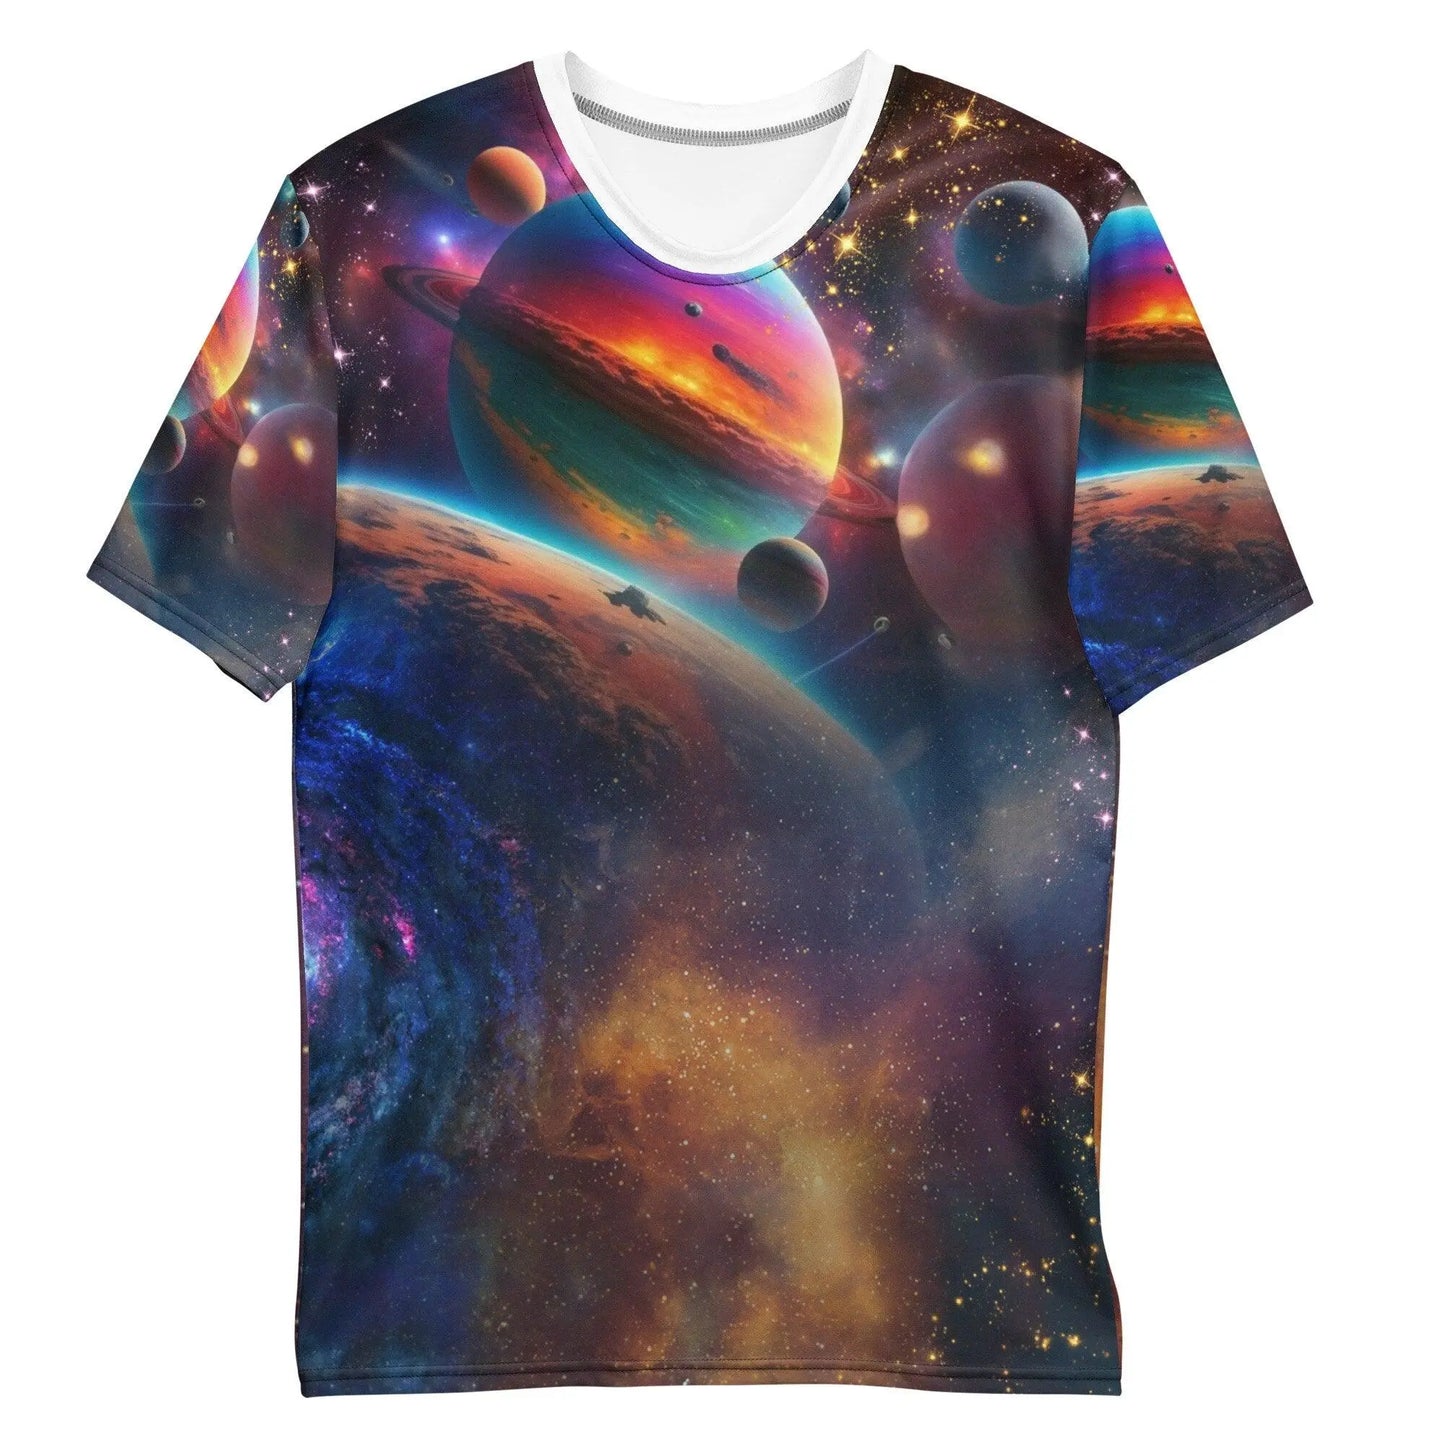 Interstellar Adventure Tee - Colorful Fantasy Realism Artwork - Save Our Planet & Journey to the Stars